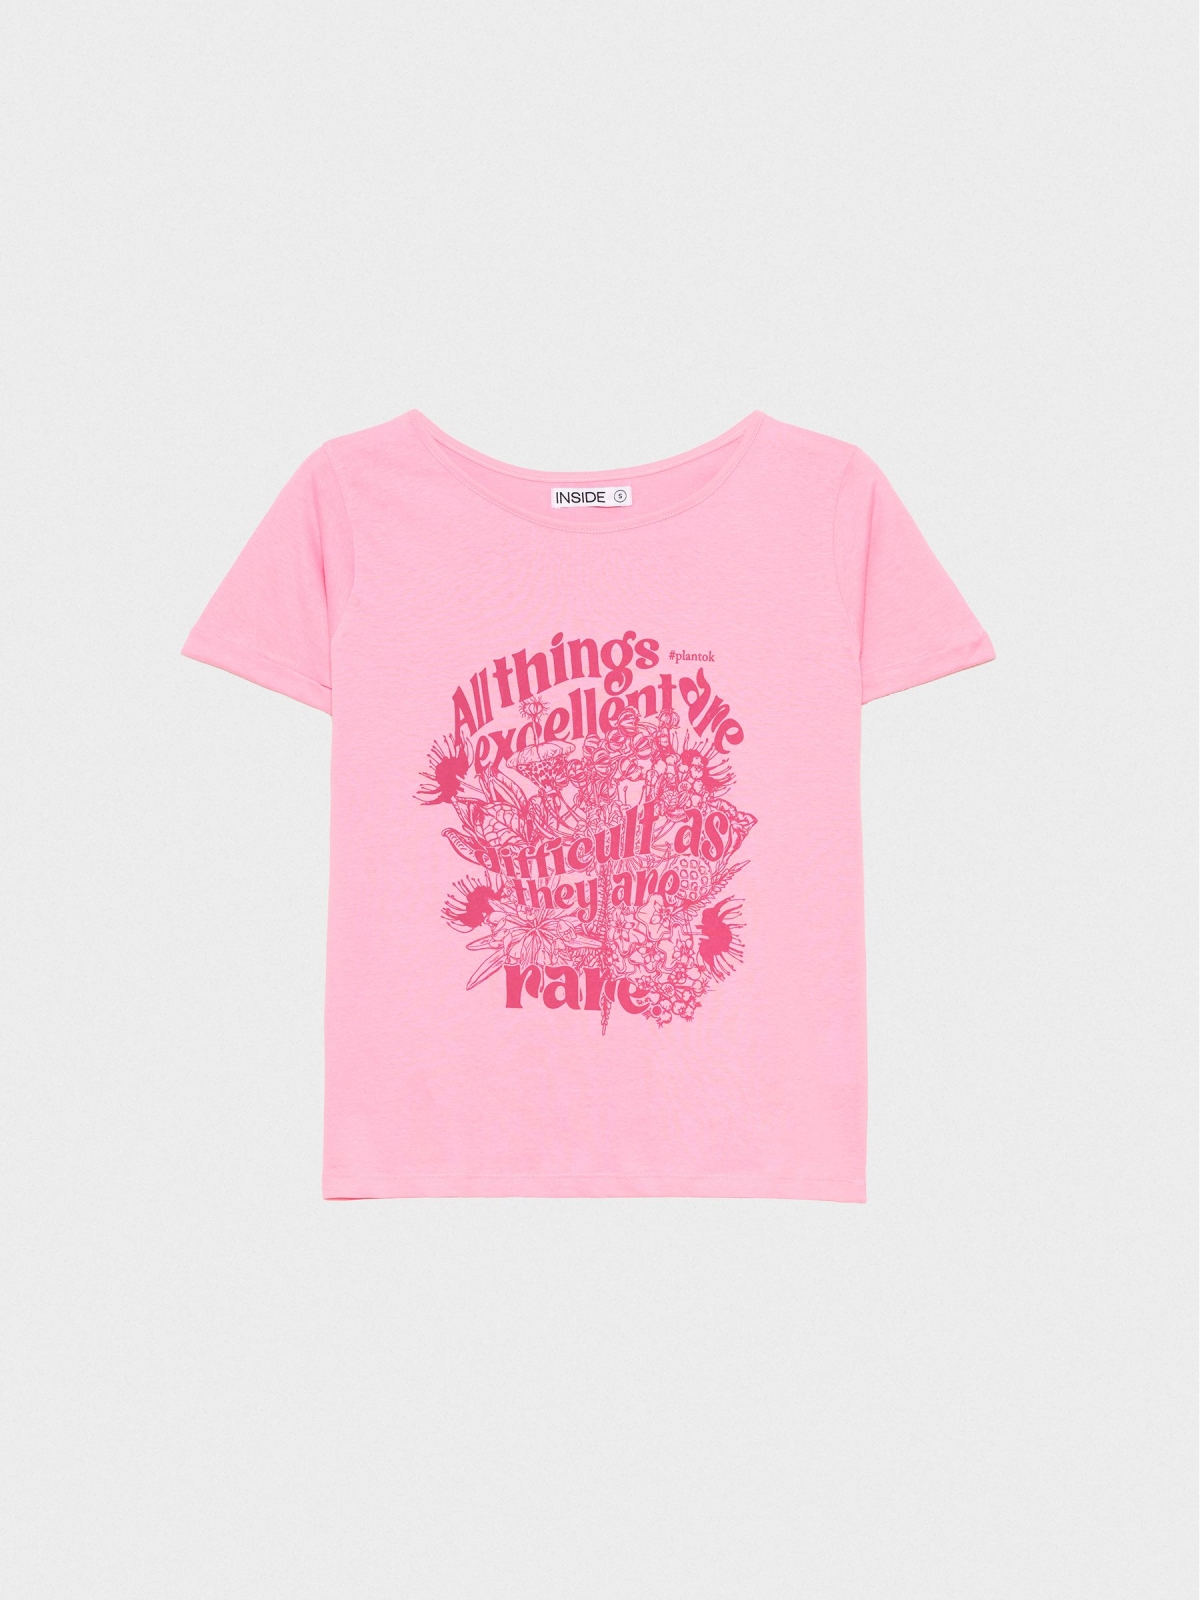  Camiseta All Things Excellent rosa